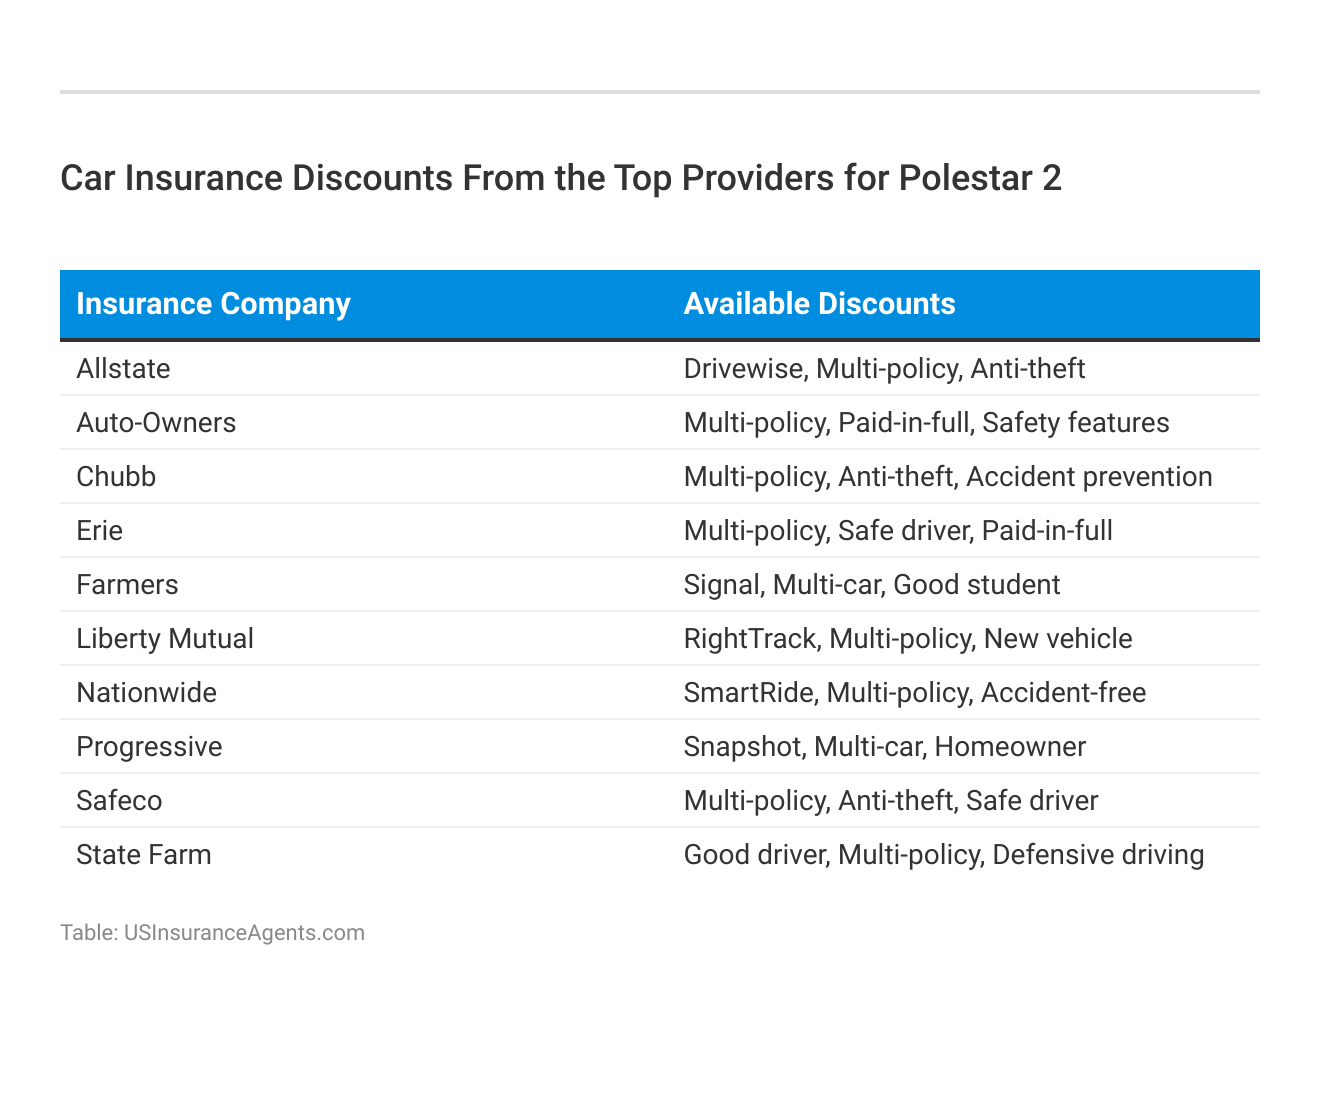 <h3>Car Insurance Discounts From the Top Providers for Polestar 2</h3>